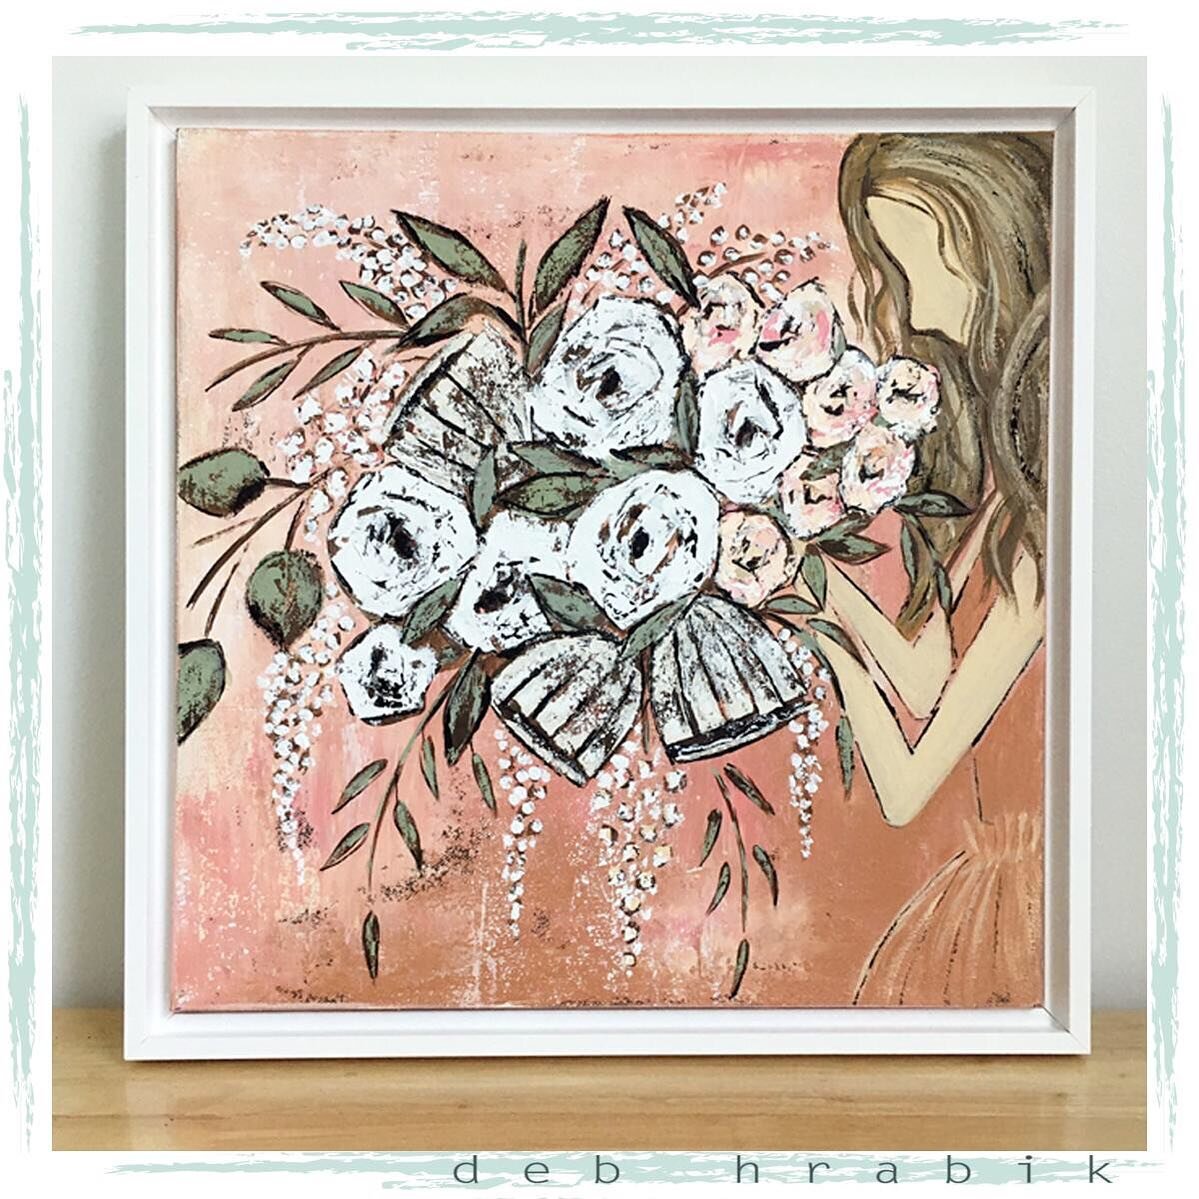 Sunday ....
A sweet reminder to take in the beauty of the earth. 
&ldquo;Lord of all- to thee we raise, this, our hymn of grateful praise&rdquo;.
.
.
#flowerpainting #flowerpaintings #bouquet #bouquetofflowers #flowergirl #bridesmaids #weddingart #de